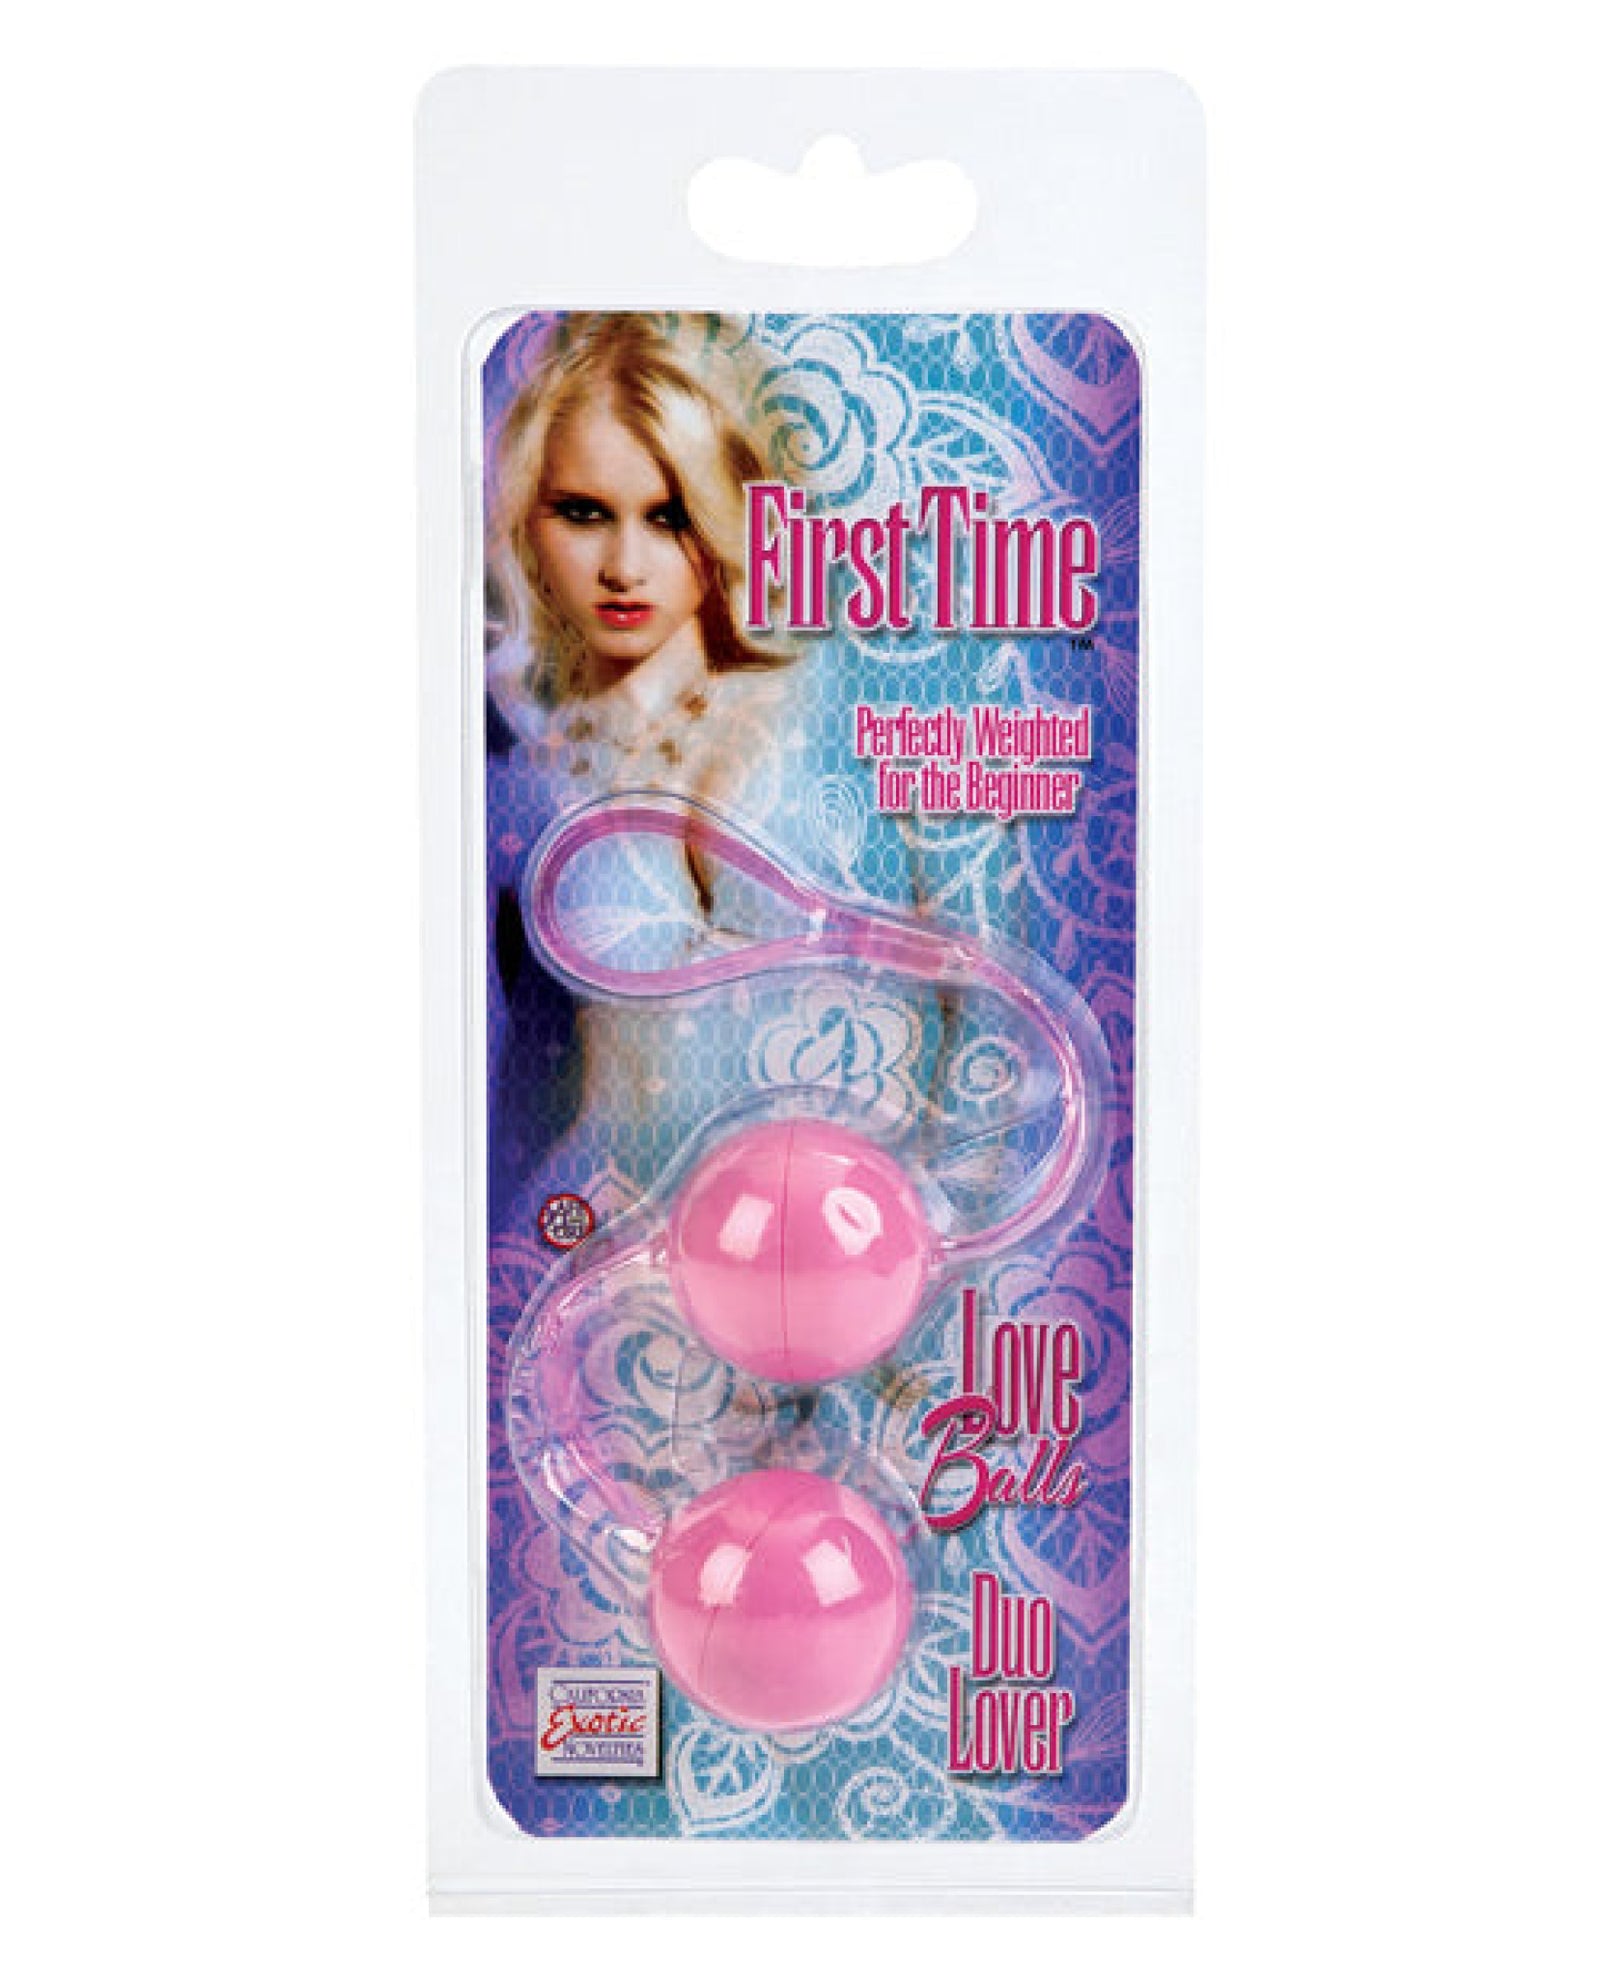 First Time Love Balls Duo Lover California Exotic Novelties